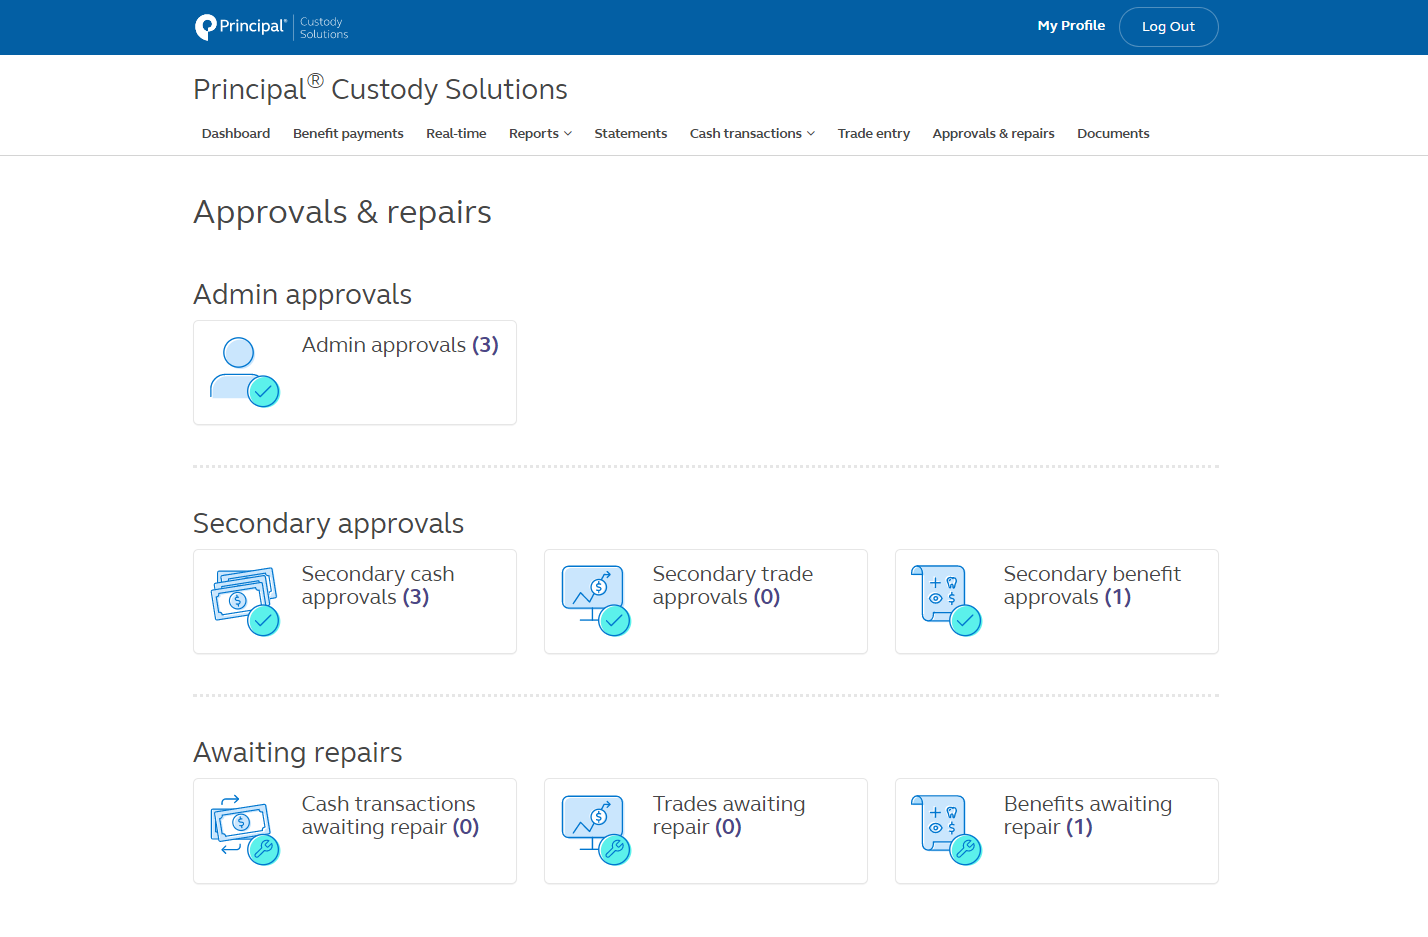 Account view providing more information on administration approvals and repairs to a custodial account. 